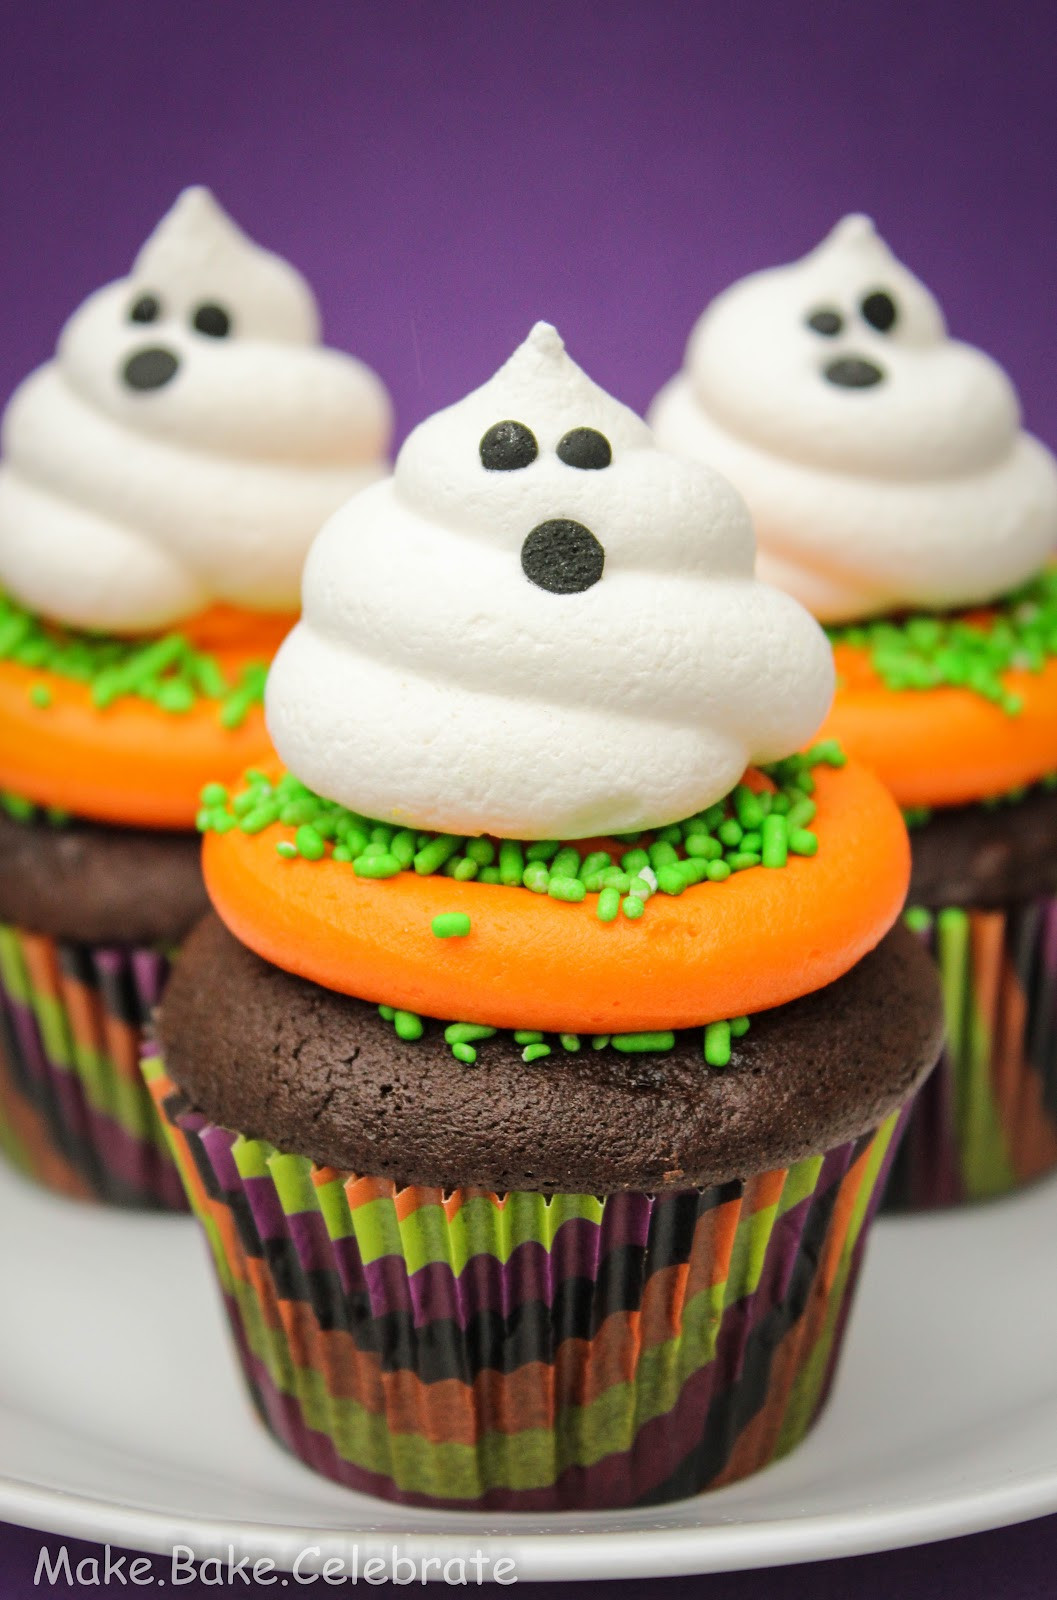 The 22 Best Ideas for Halloween Cupcakes Cake - Home, Family, Style and ...